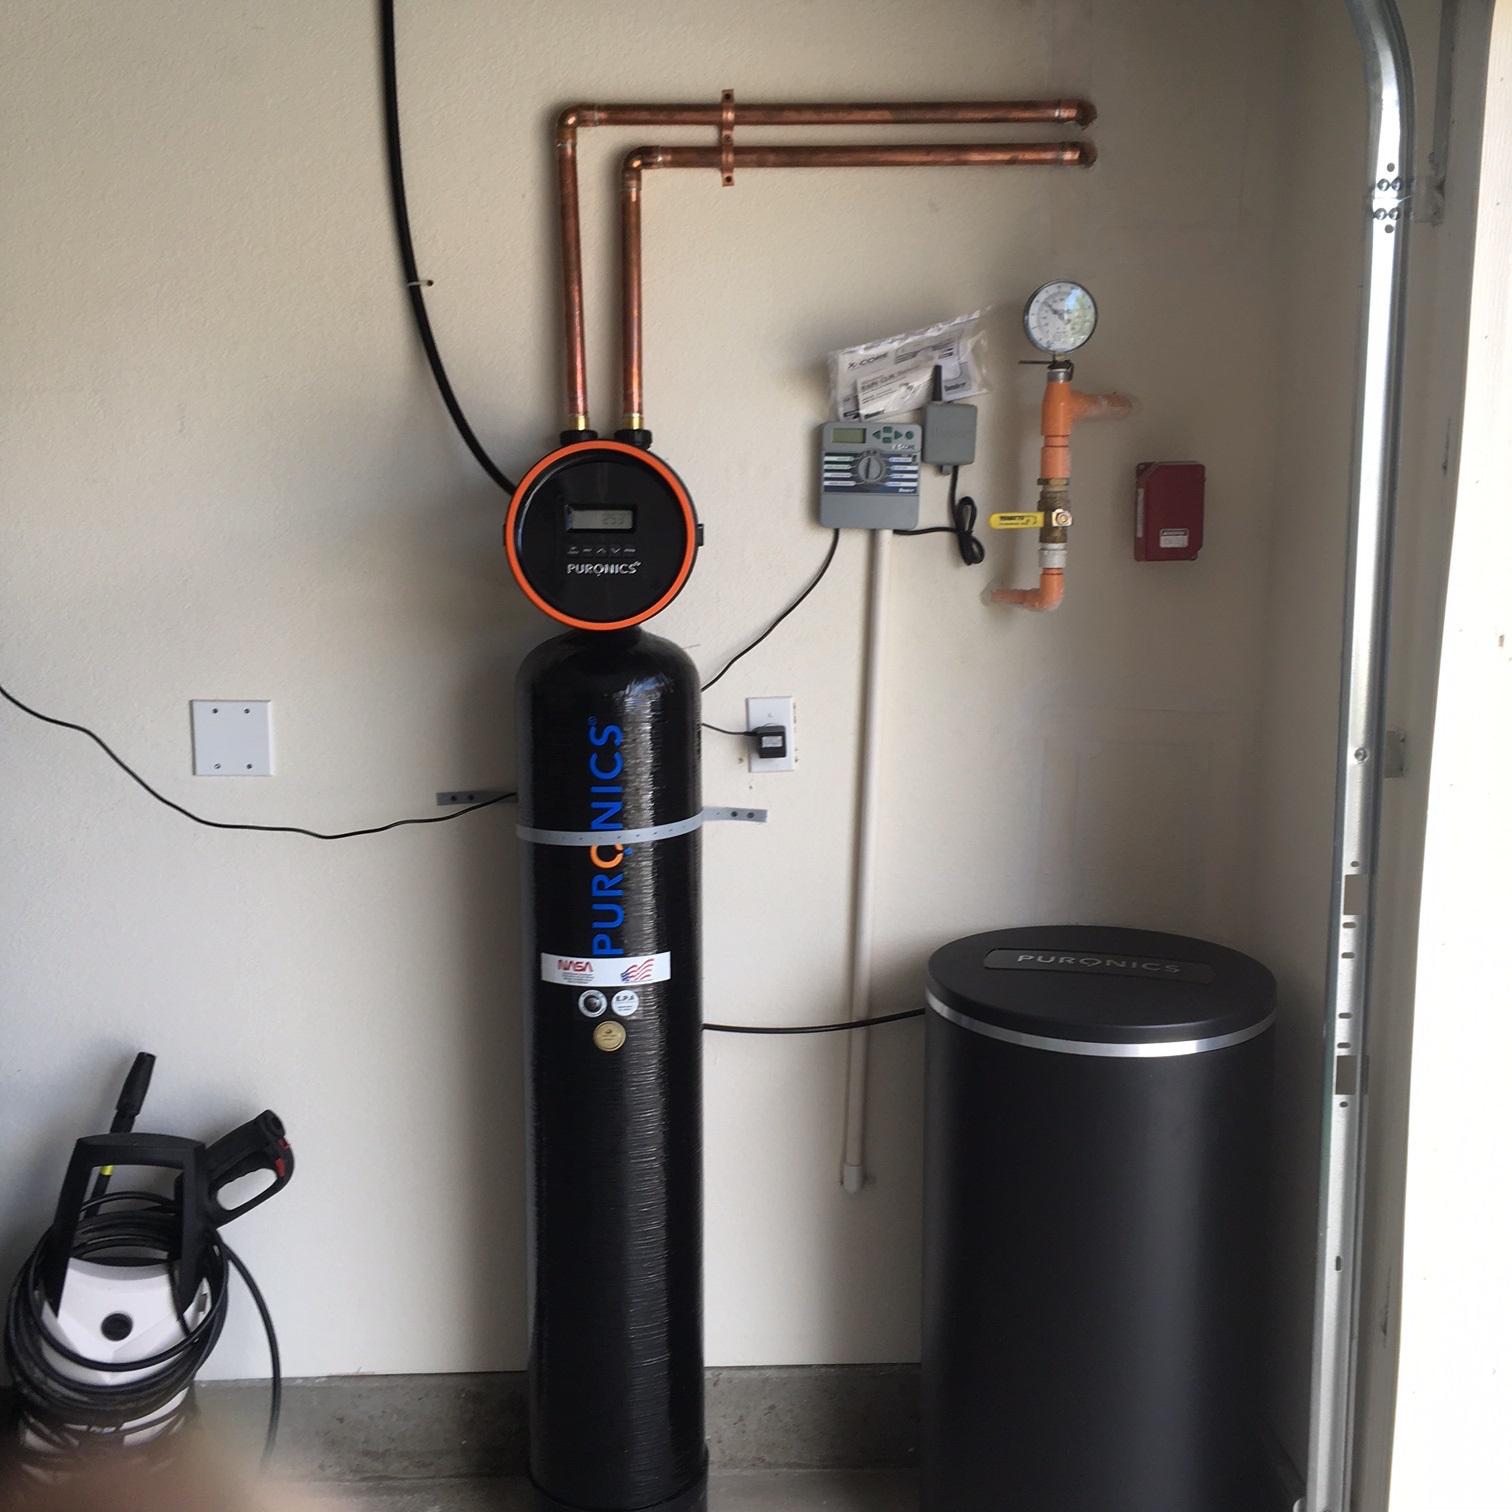 Picture of This Defender® whole-house water treatment system features a fiberglass tank and is designed to remove the taste and odor of chlorine inhibit the growth of bacteria and soften the water. - Puronics, LLC